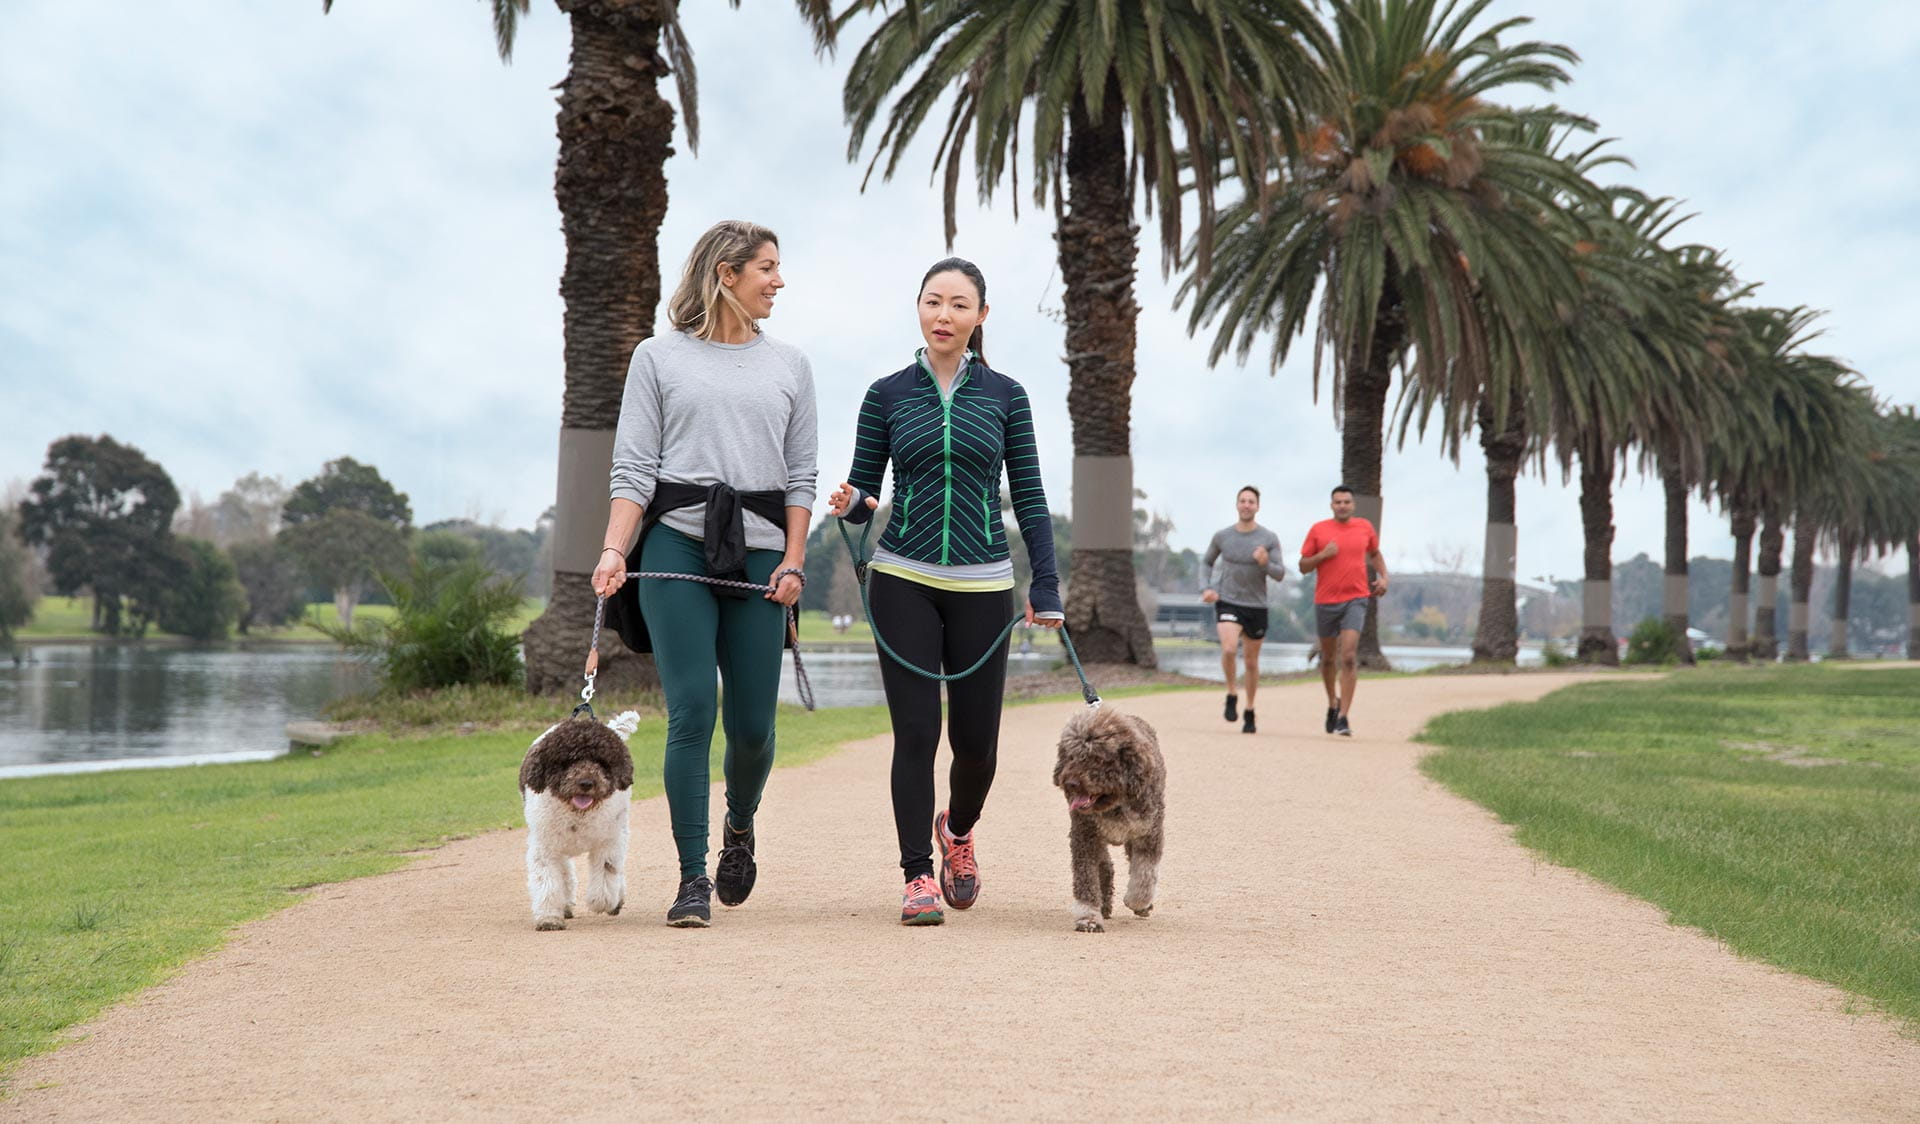 Two women in activewear walk their dogs while two runners approach them.